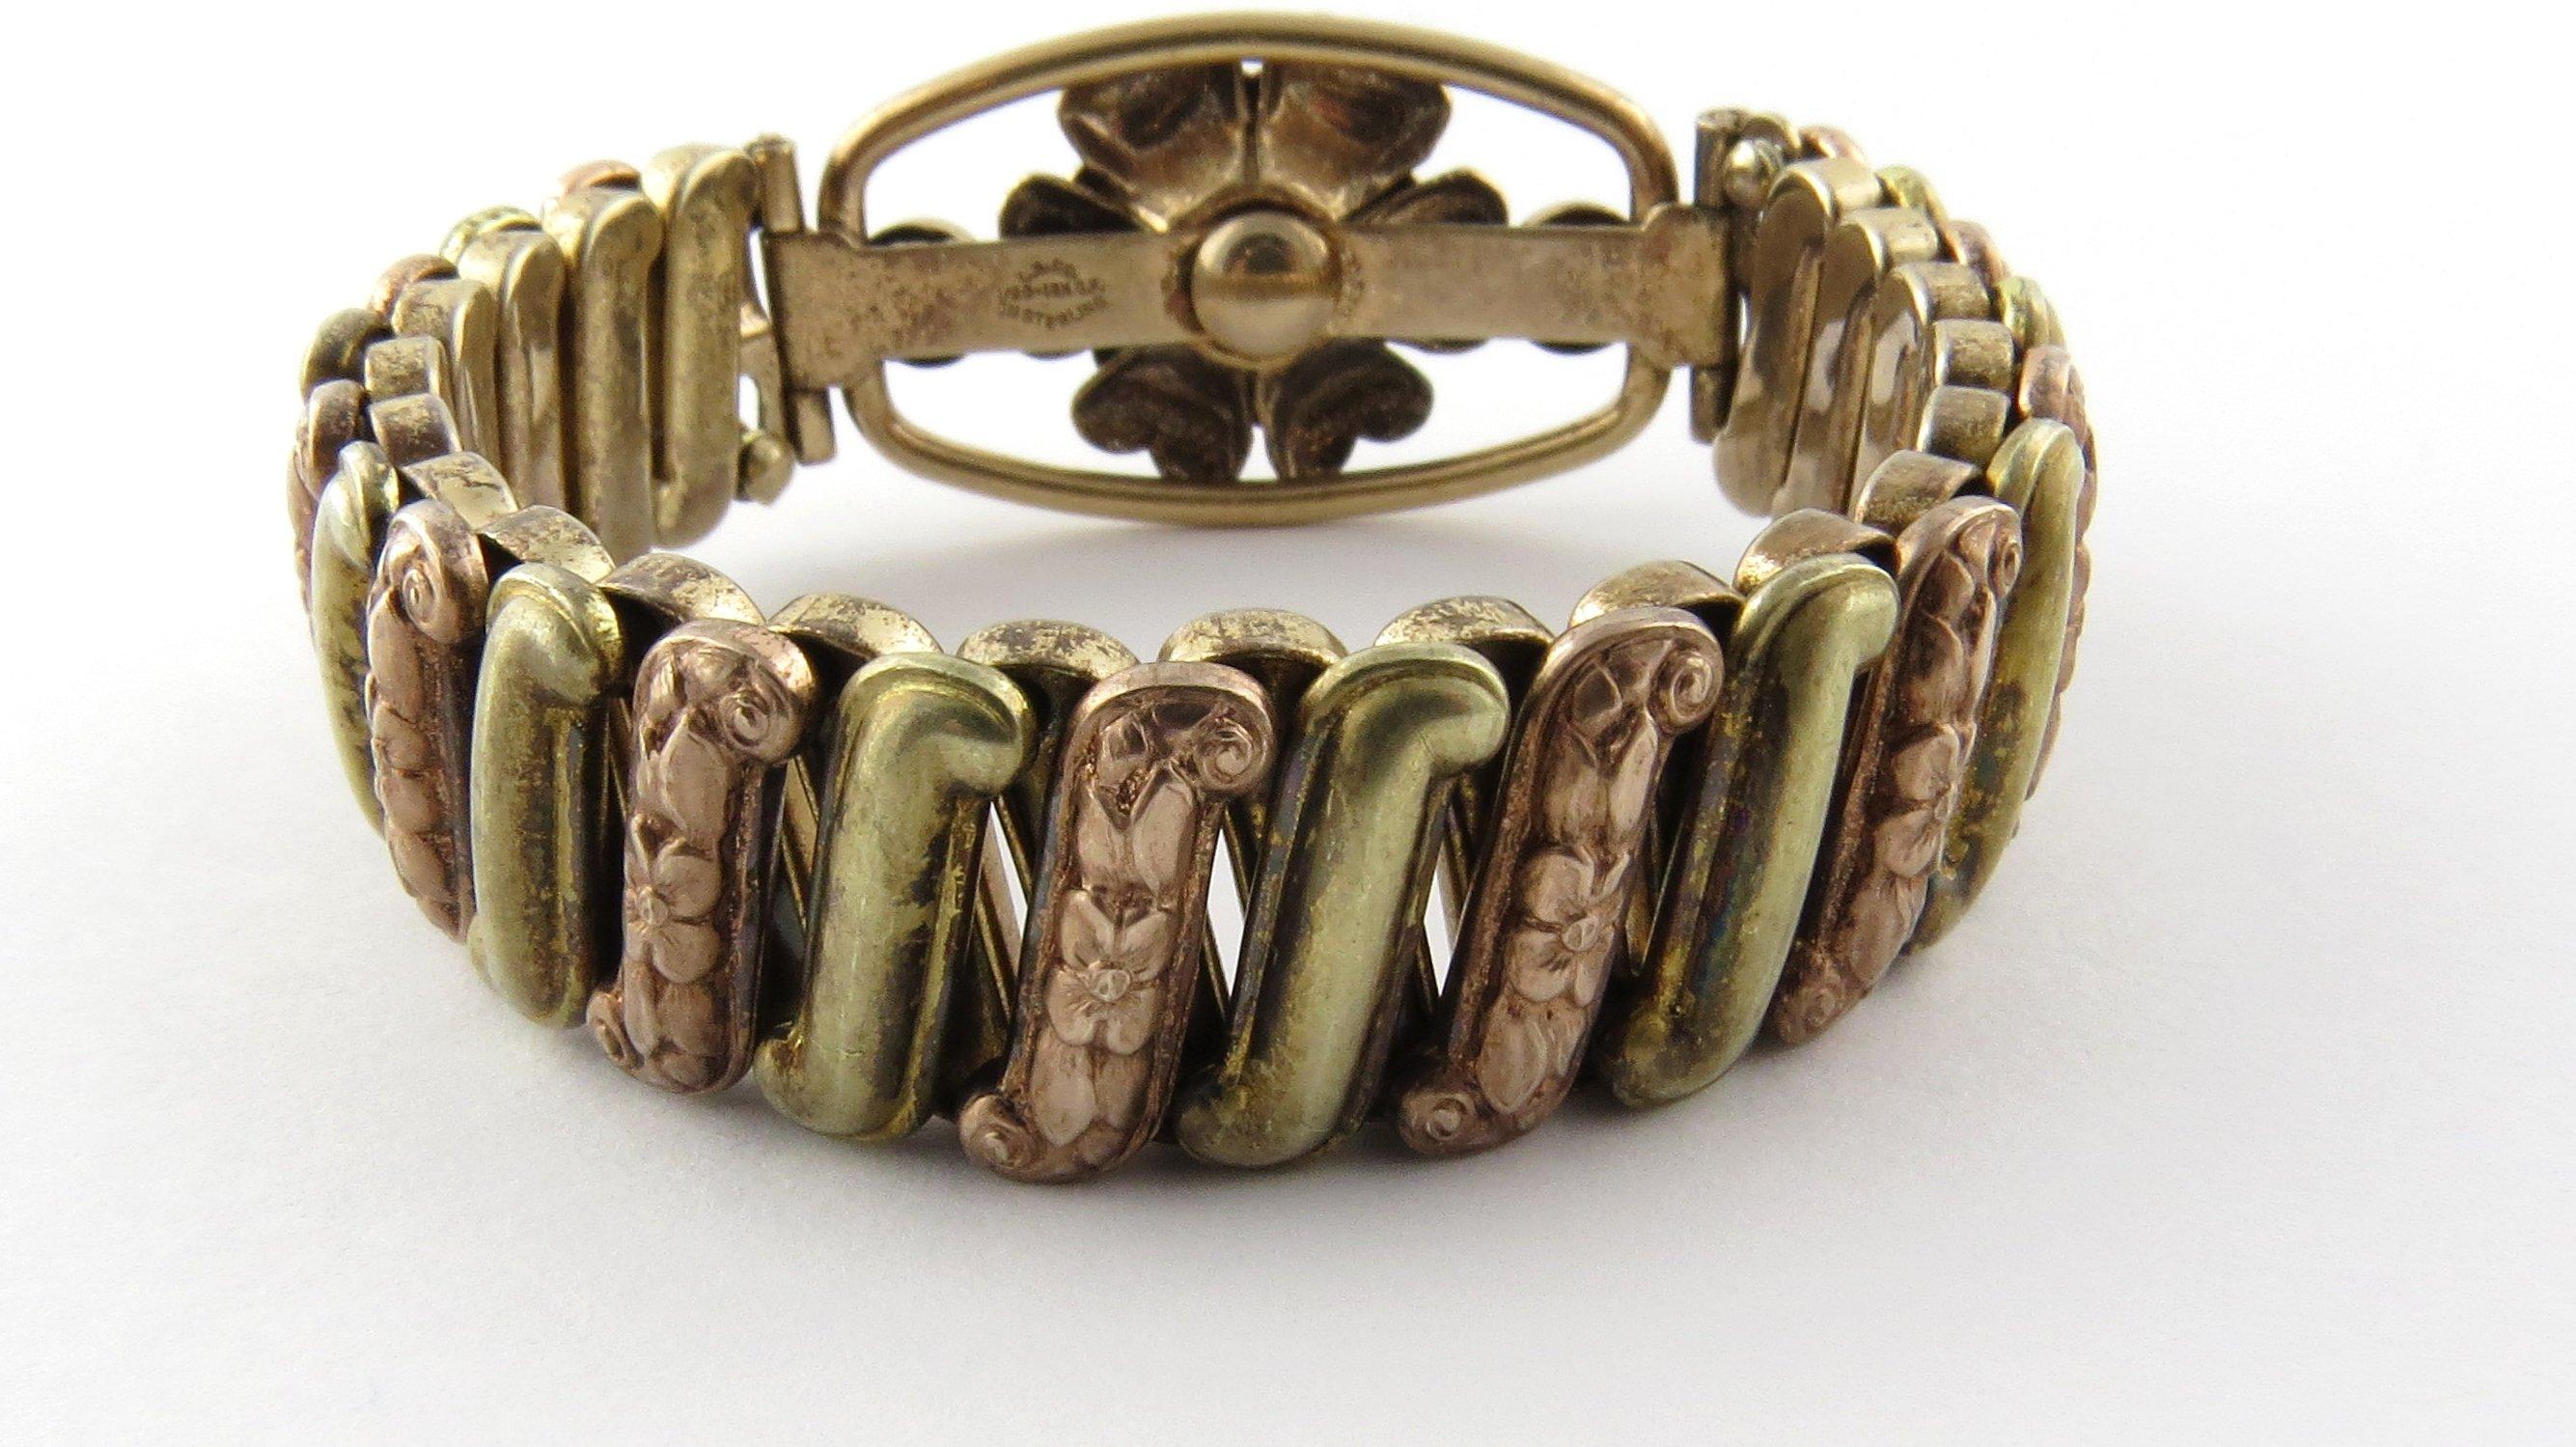 Vintage Louis Stern 12 Karat Gold Filled over Sterling Silver Expansion Bracelet- 
This lovely expansion bracelet by Louis Stern Co. features a beautiful floral center accented with ten red gemstones. Bracelet features alternating floral and plain